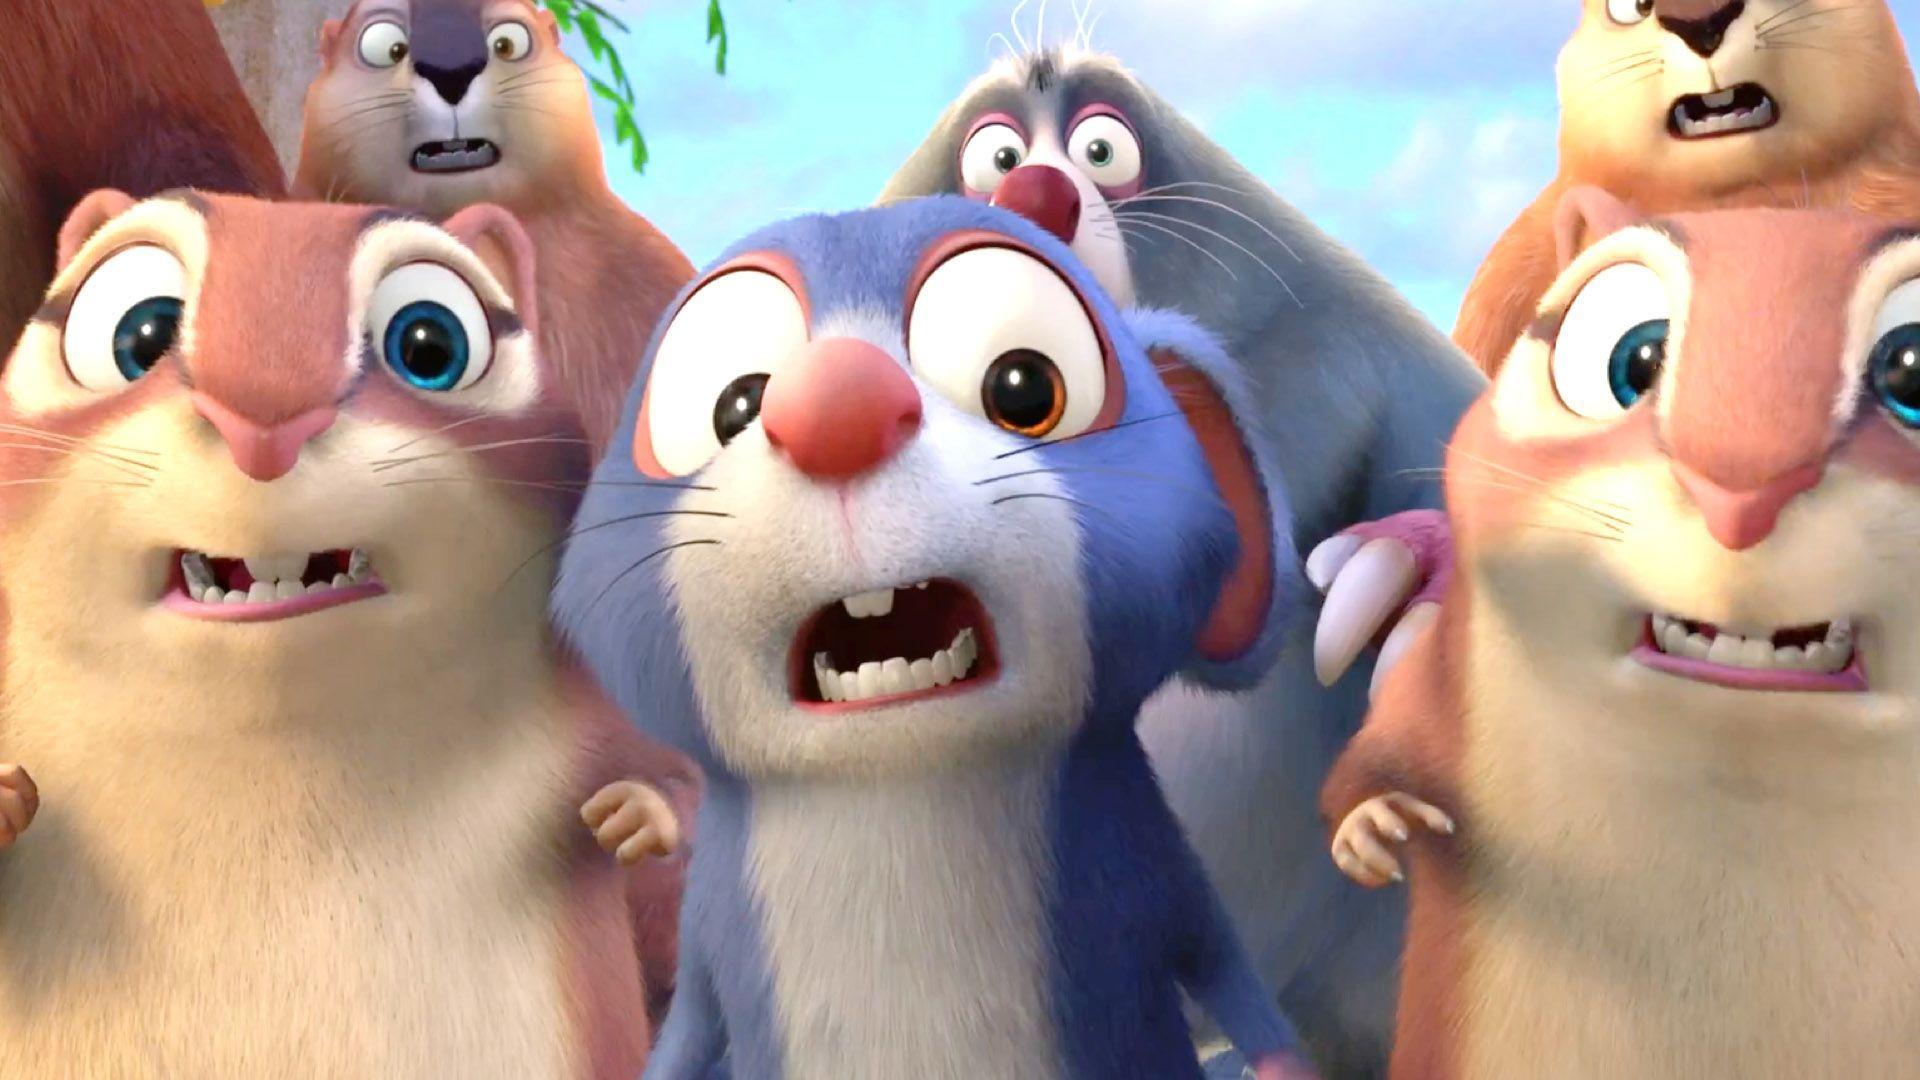 The Nut Job 2: Nutty by Nature: The Nut Job 2 Nutty